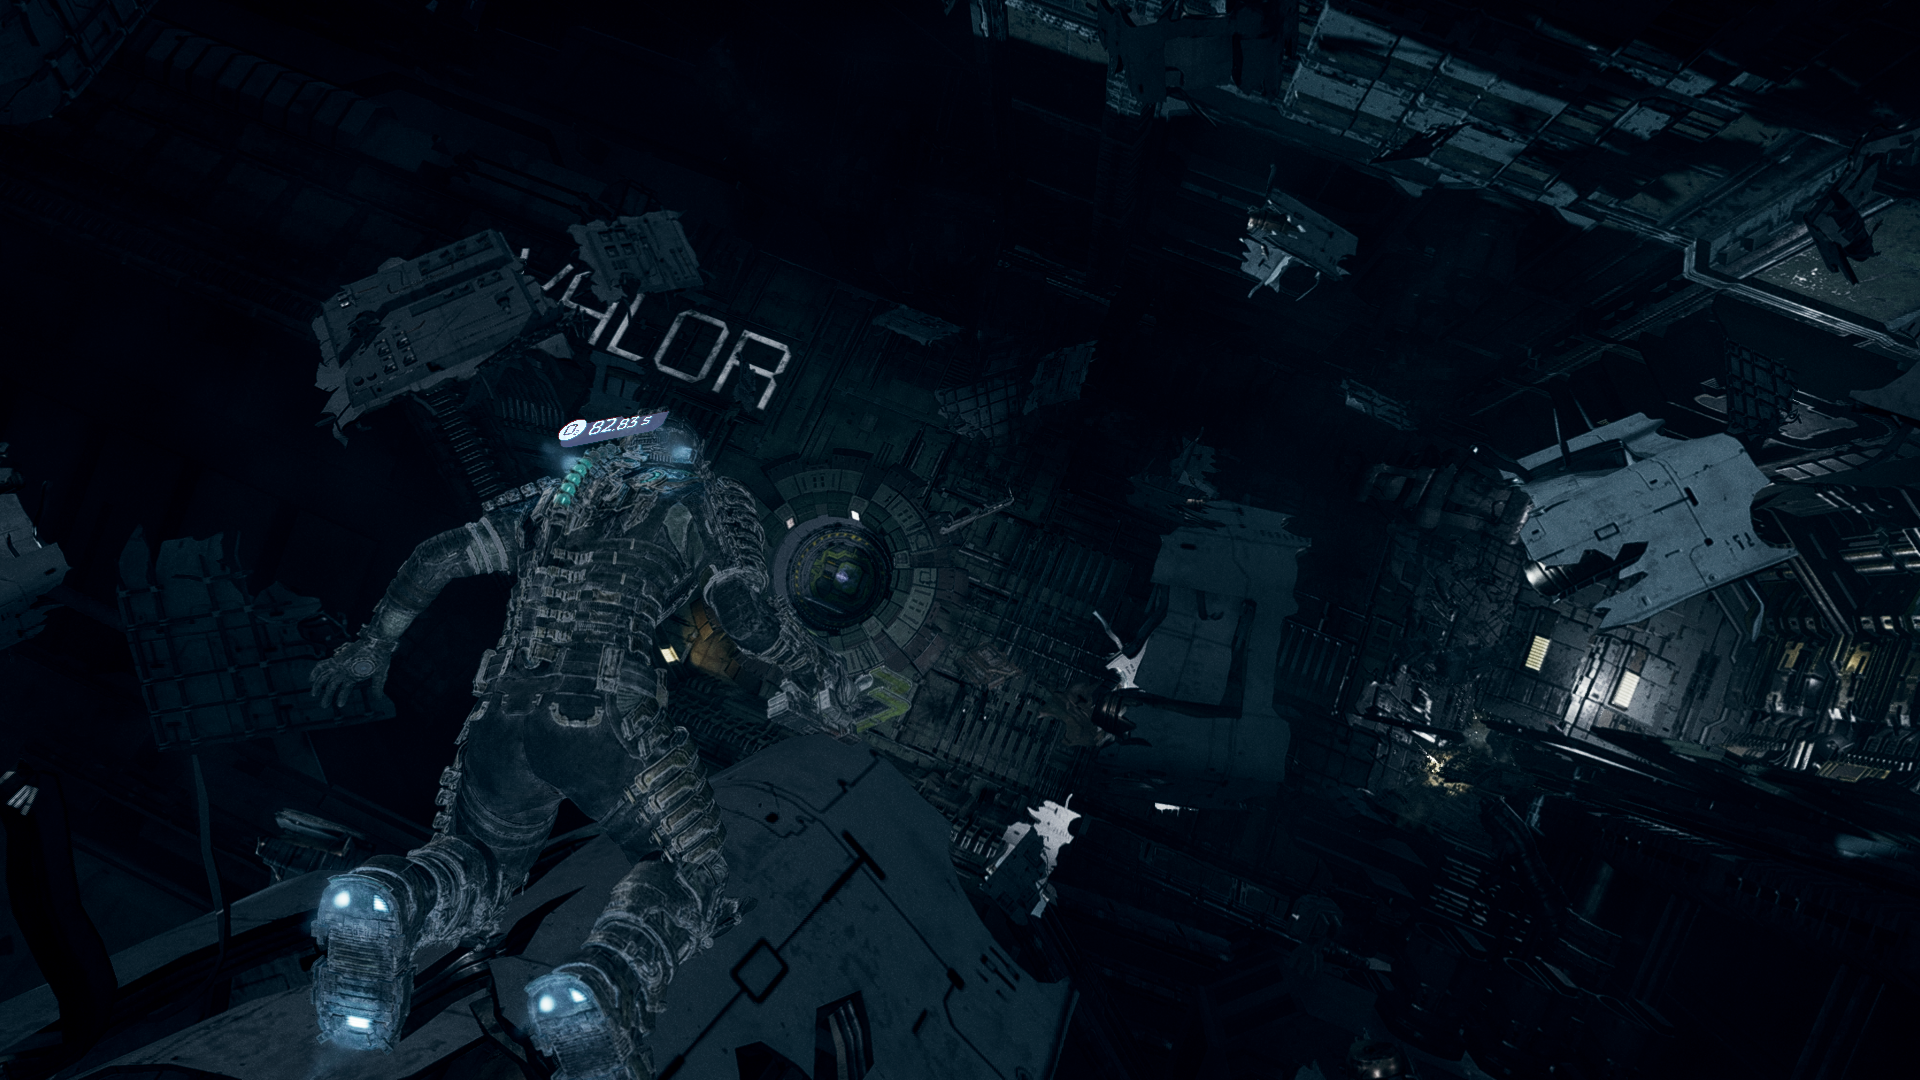 Isaac floats towards the Valor in Dead Space